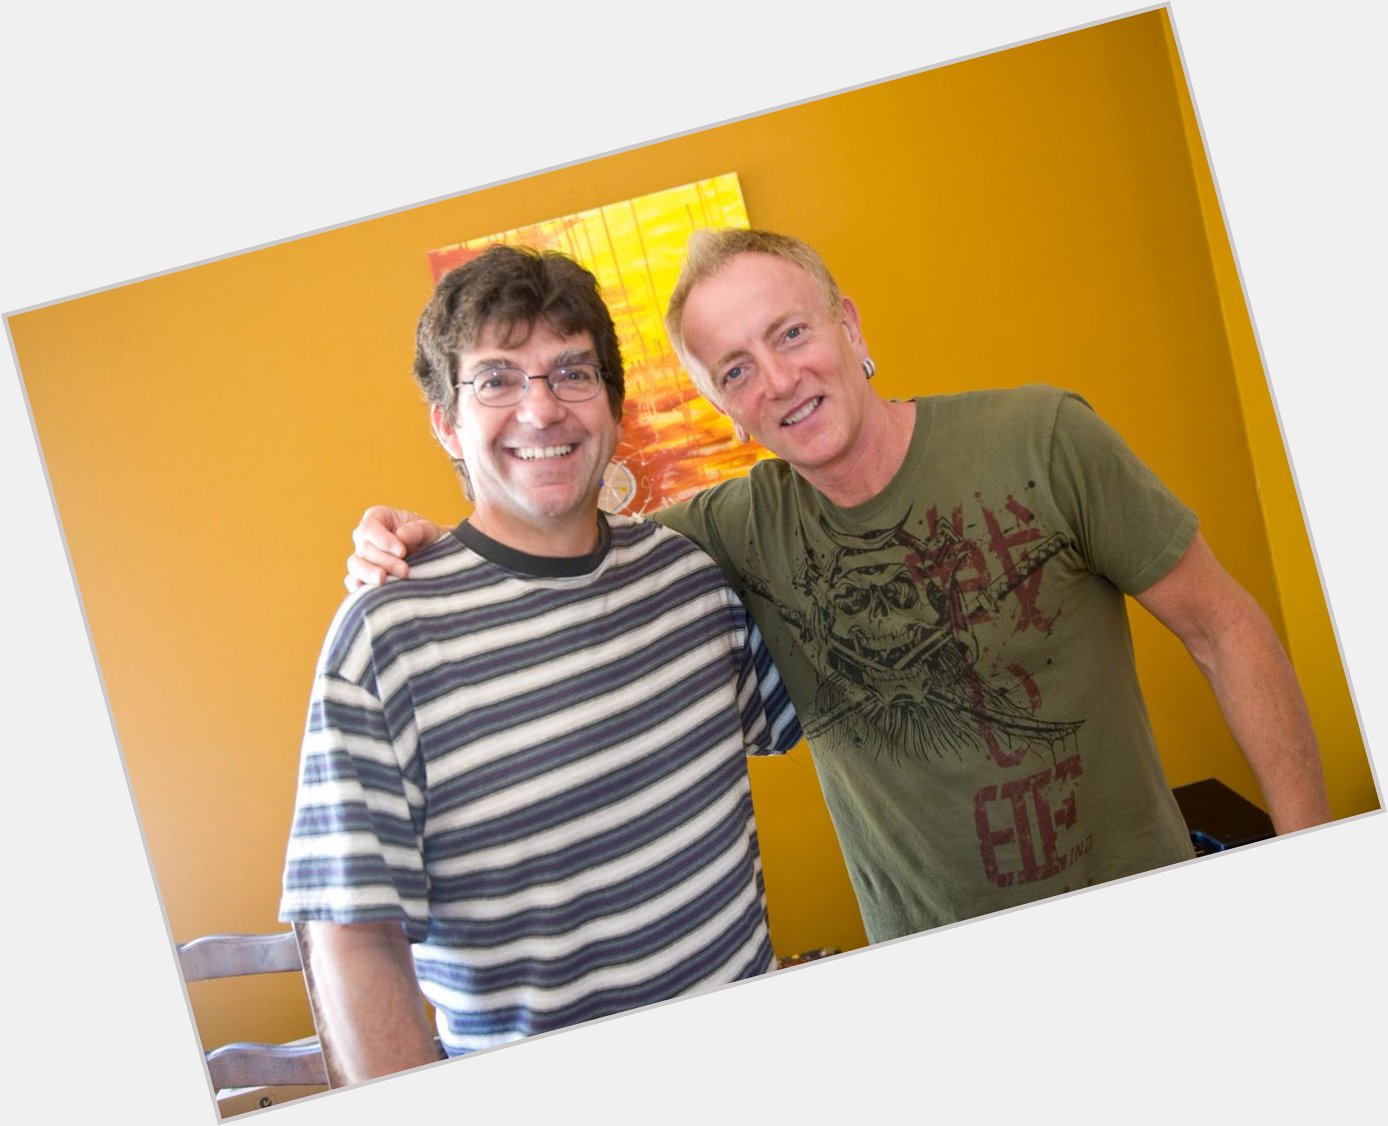   - Happy birthday Phil Collen, one of my favorite guitar players and a super cool guy! 